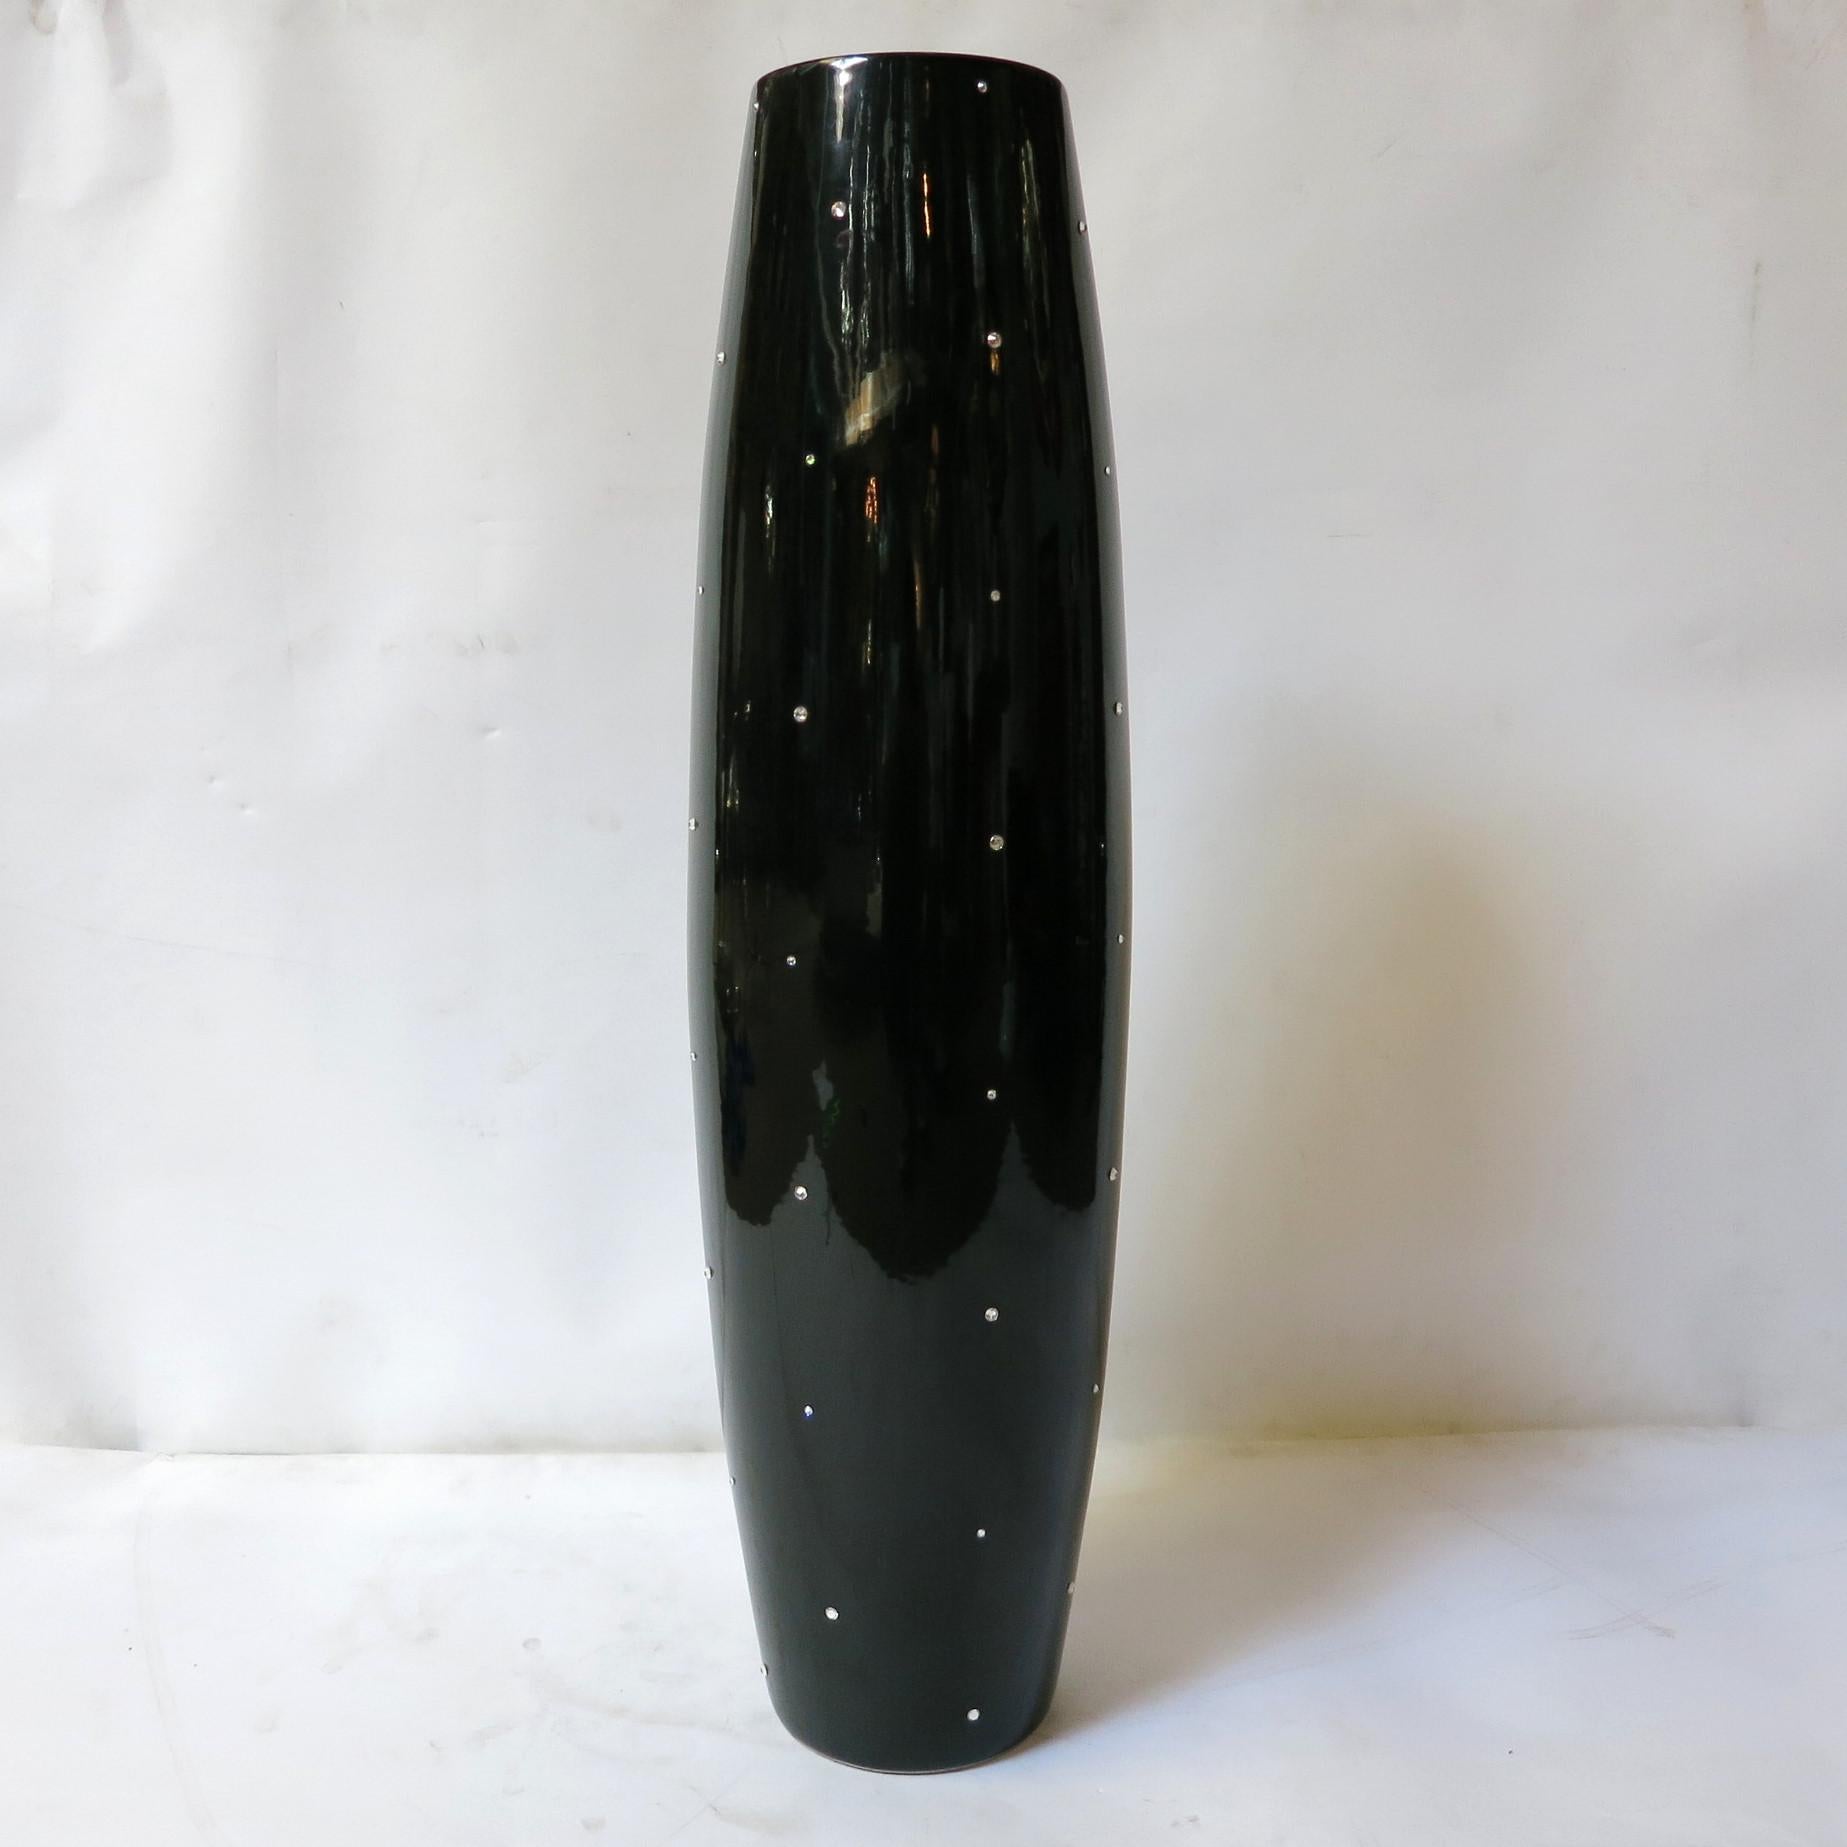 One of a kind black ceramic cigar shaped vase with Swarovski crystals / Designed by Fabio Bergomi / Made in Italy
Height: 36 inches / Diameter: 9 inches
1 in stock in Palm Springs  currently ON FINAL CLEARANCE SALE for $799!!!
This piece makes for a